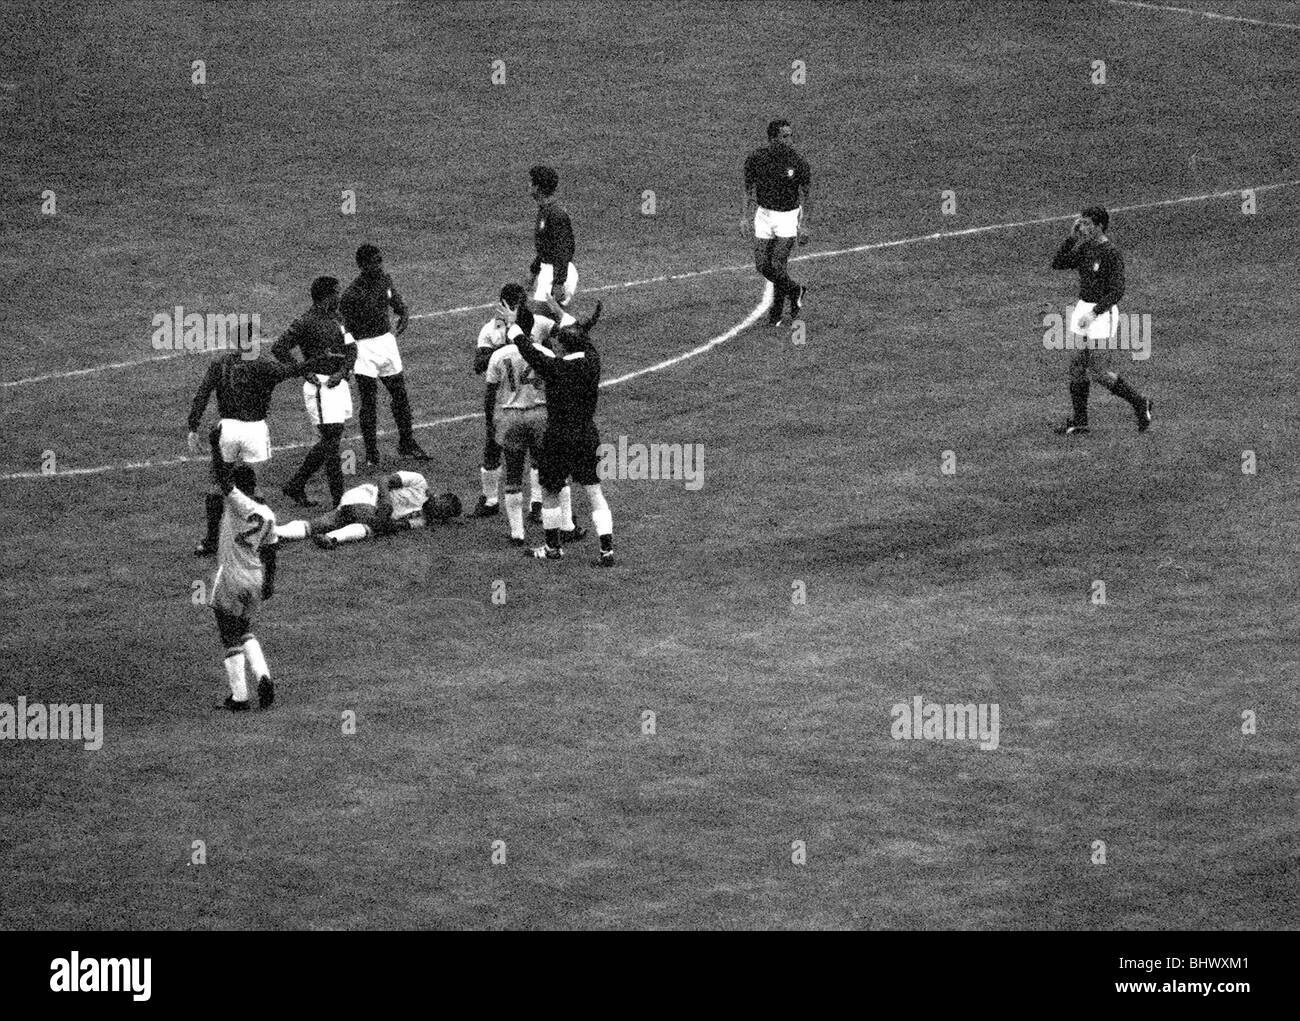 International Football July 1966 Brazil v Portugal World Cup 1966 Group Phase Pele lies injured on floor Stock Photo